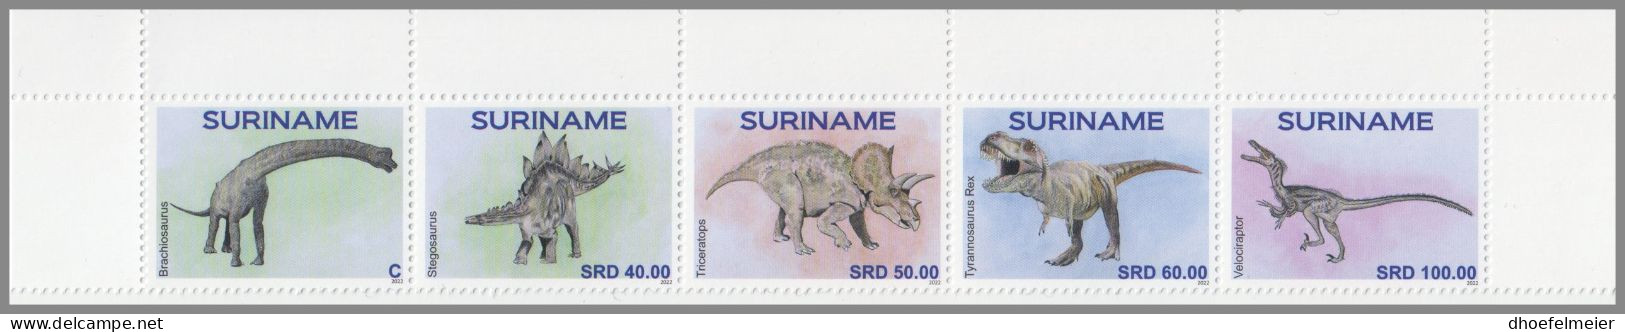 SURINAME 2022 MNH Dinosaurs Dinosaurier 5v – OFFICIAL ISSUE – DHQ49610 - Préhistoriques